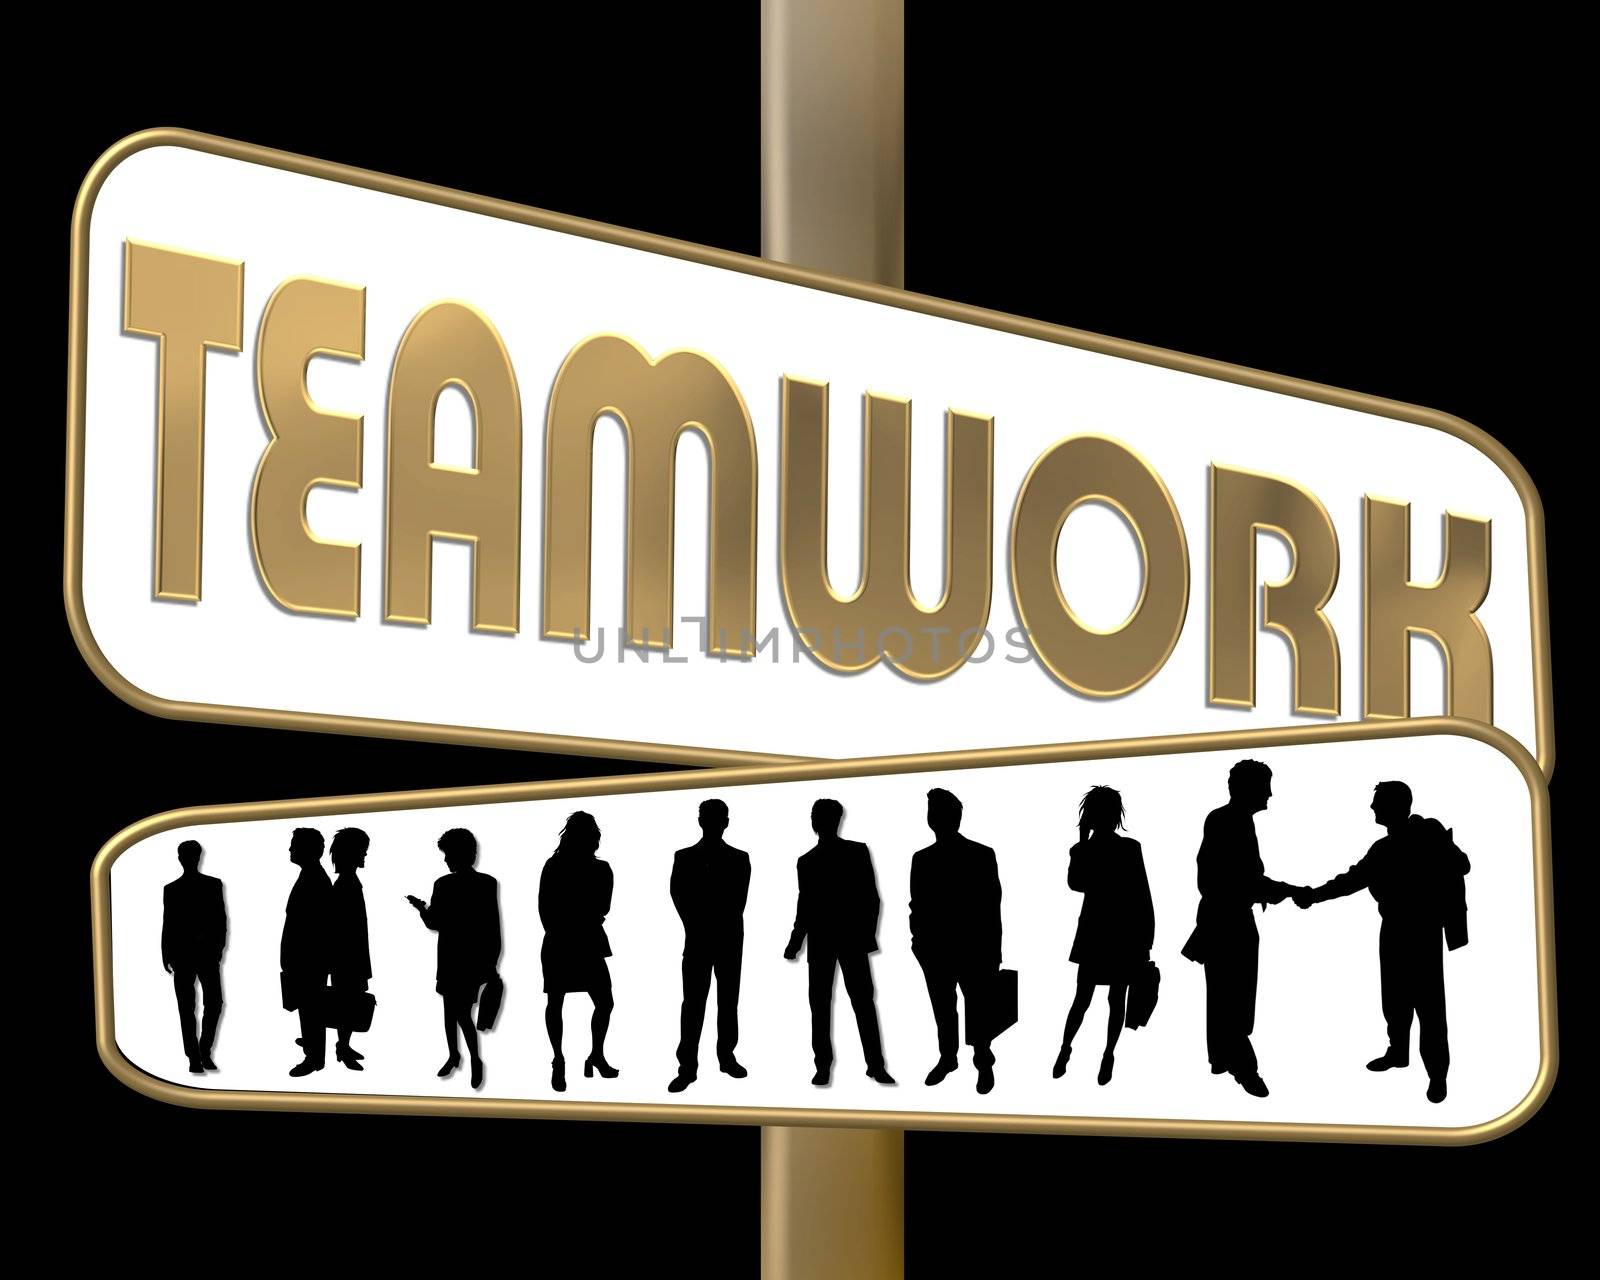 road sign shows the word teamwork